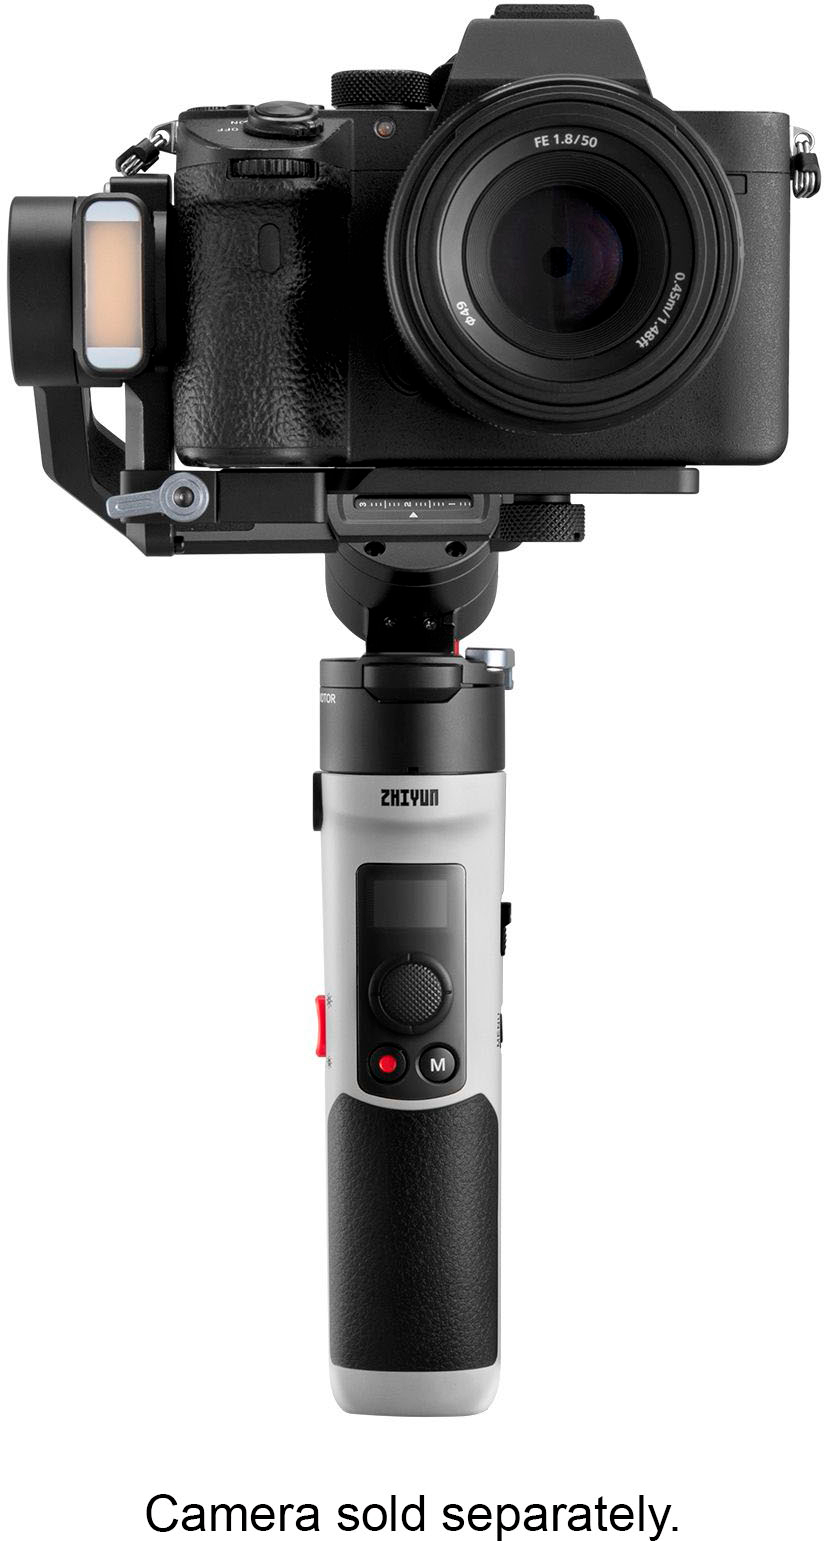 Zhiyun Crane-M2 S 3-Axis Gimbal Stabilizer for Smartphones, Action